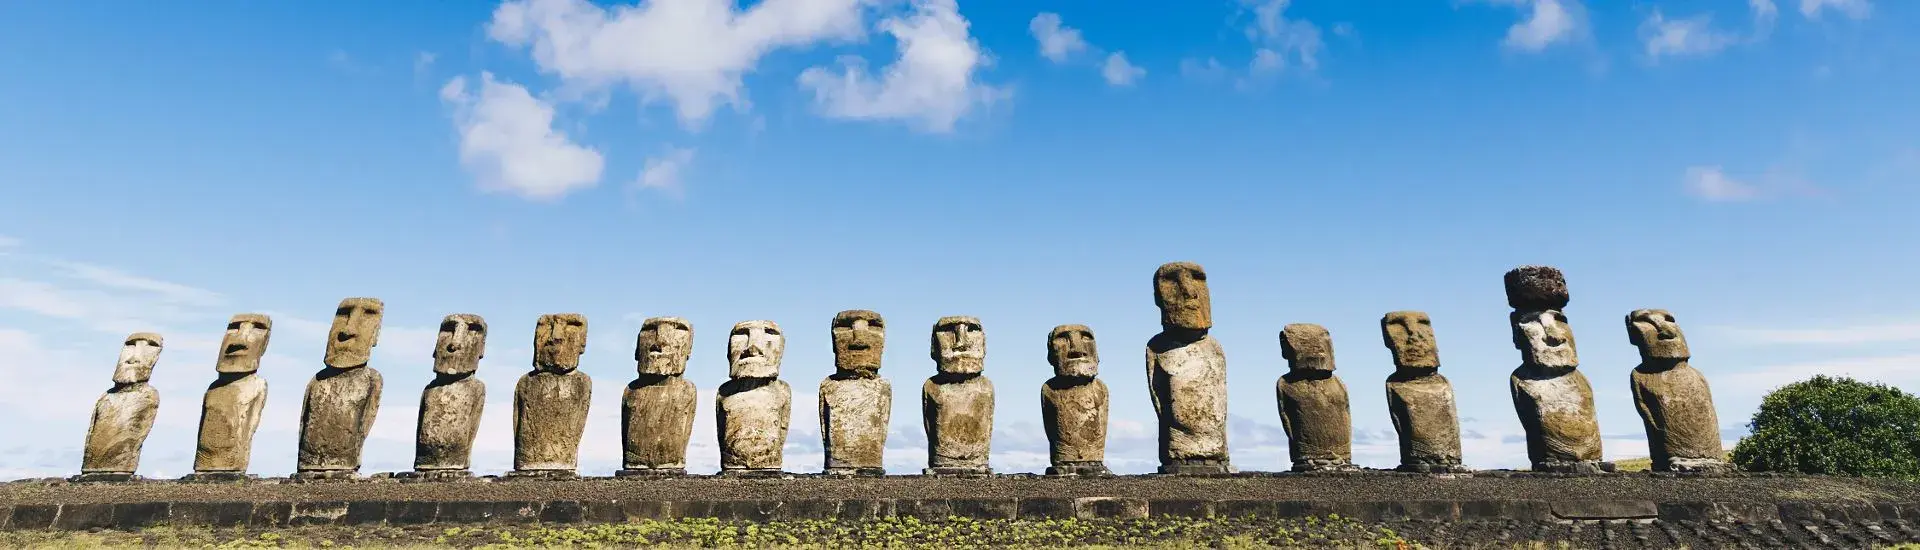 Row of moais in Rapa Nui National Park, Easter Island